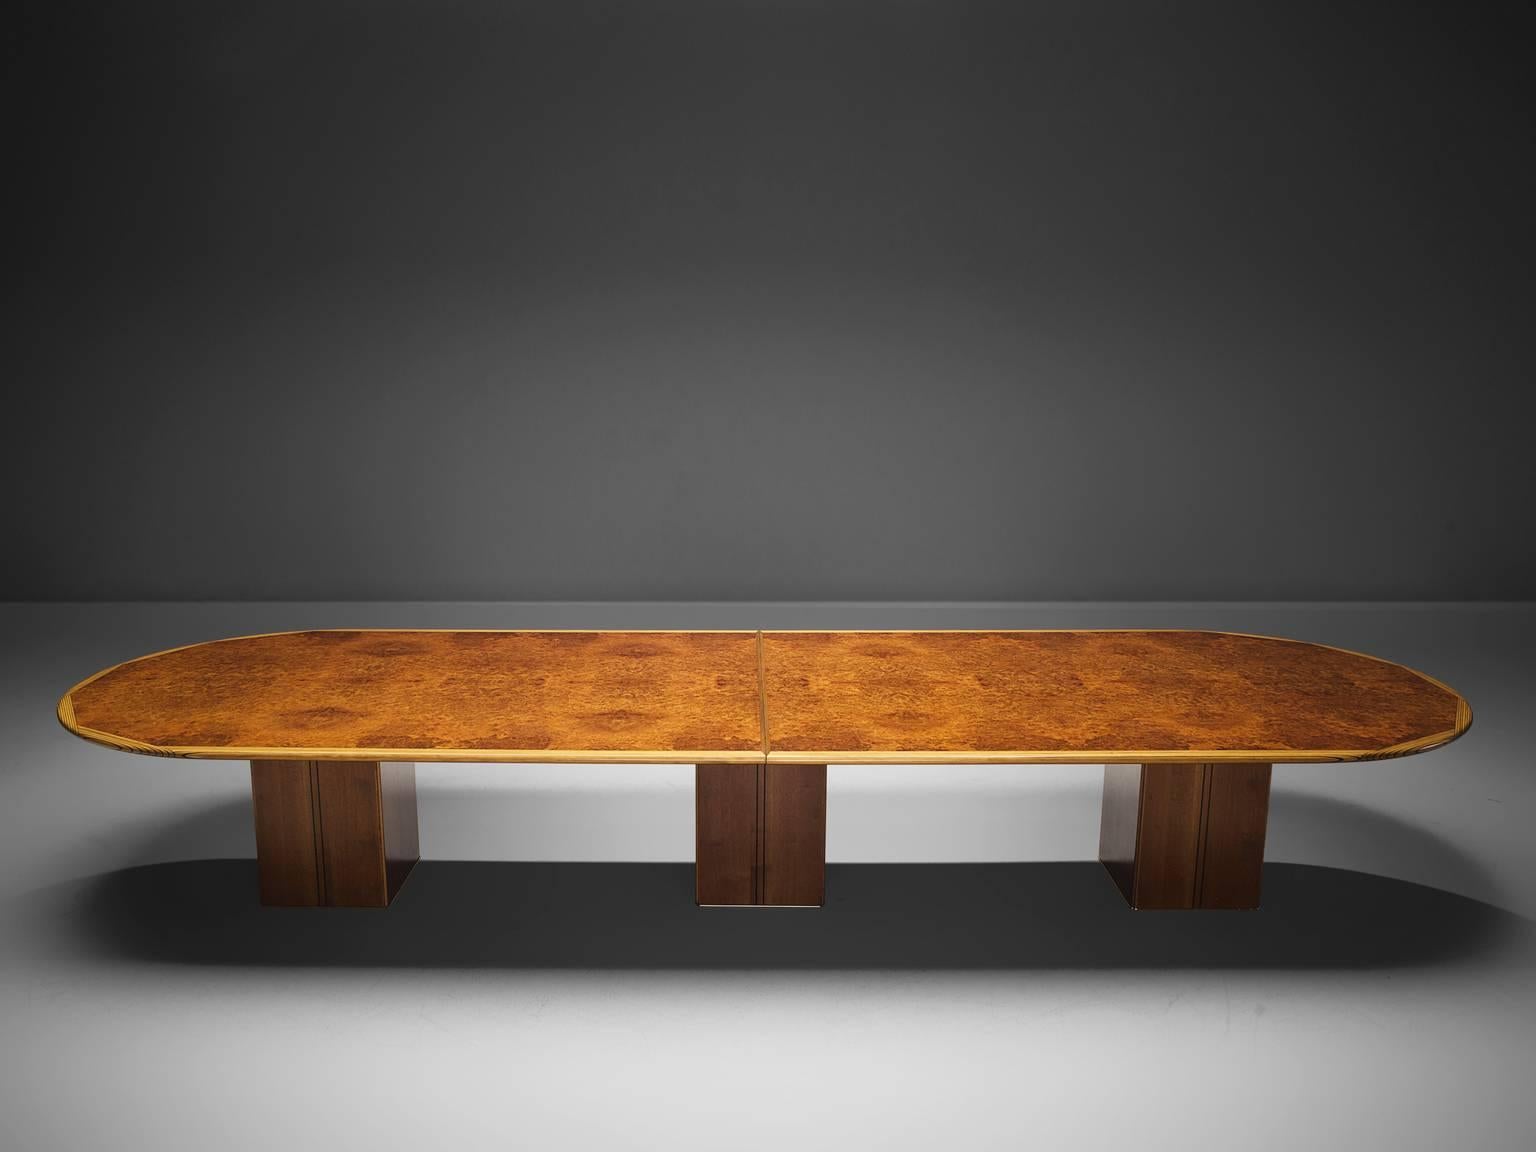 Tobia & Afra Scarpa for Maxalto, 'Artona' table, burl, walnut, 1979

The Artona line by the Scarpa duo was in fact the first line ever produced by Maxalto, the specialist division of B&B Italia. Maxalto was originally set up in 1975 as a high-end